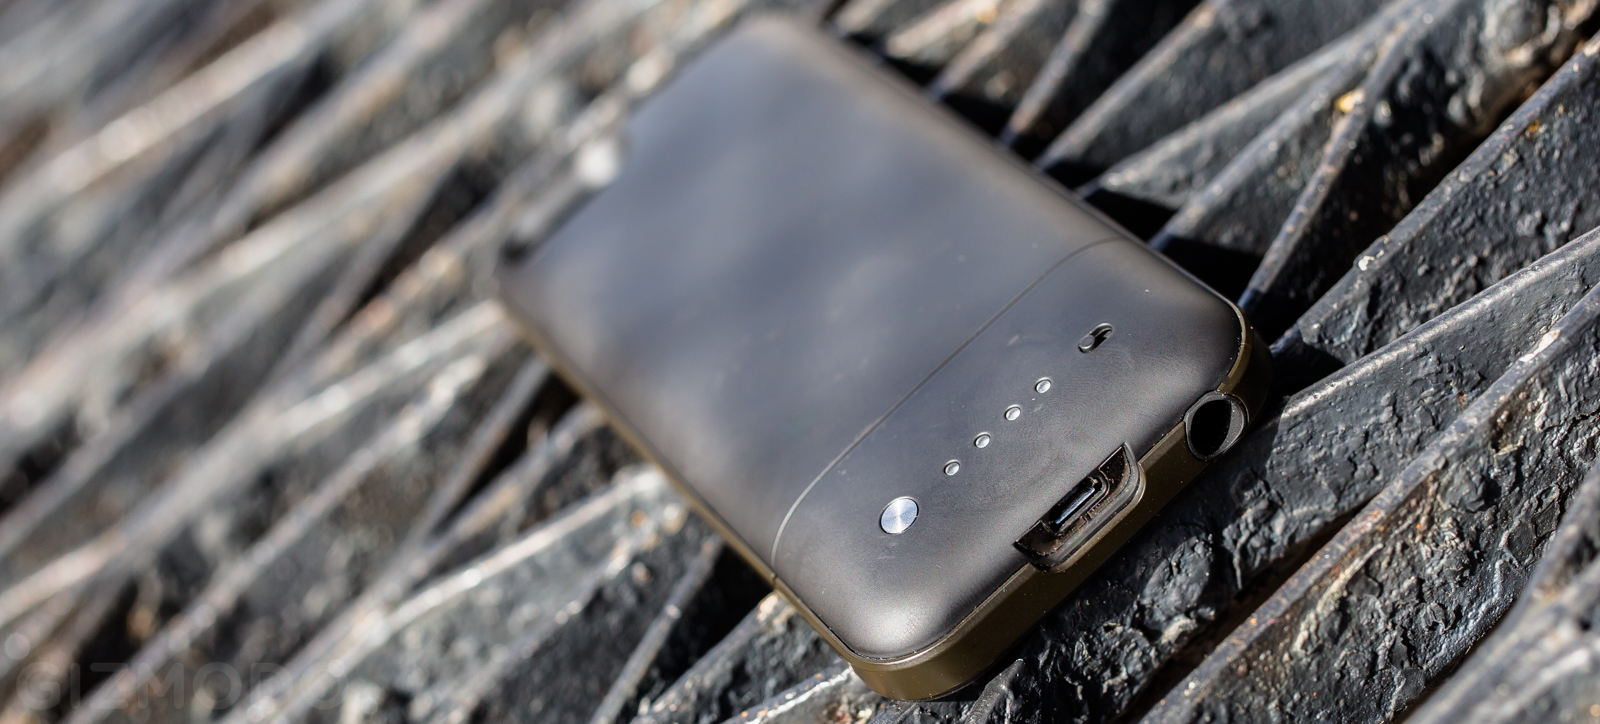 Mophie Space Pack Review: All The iPhone Storage You Need (Plus Bulk)